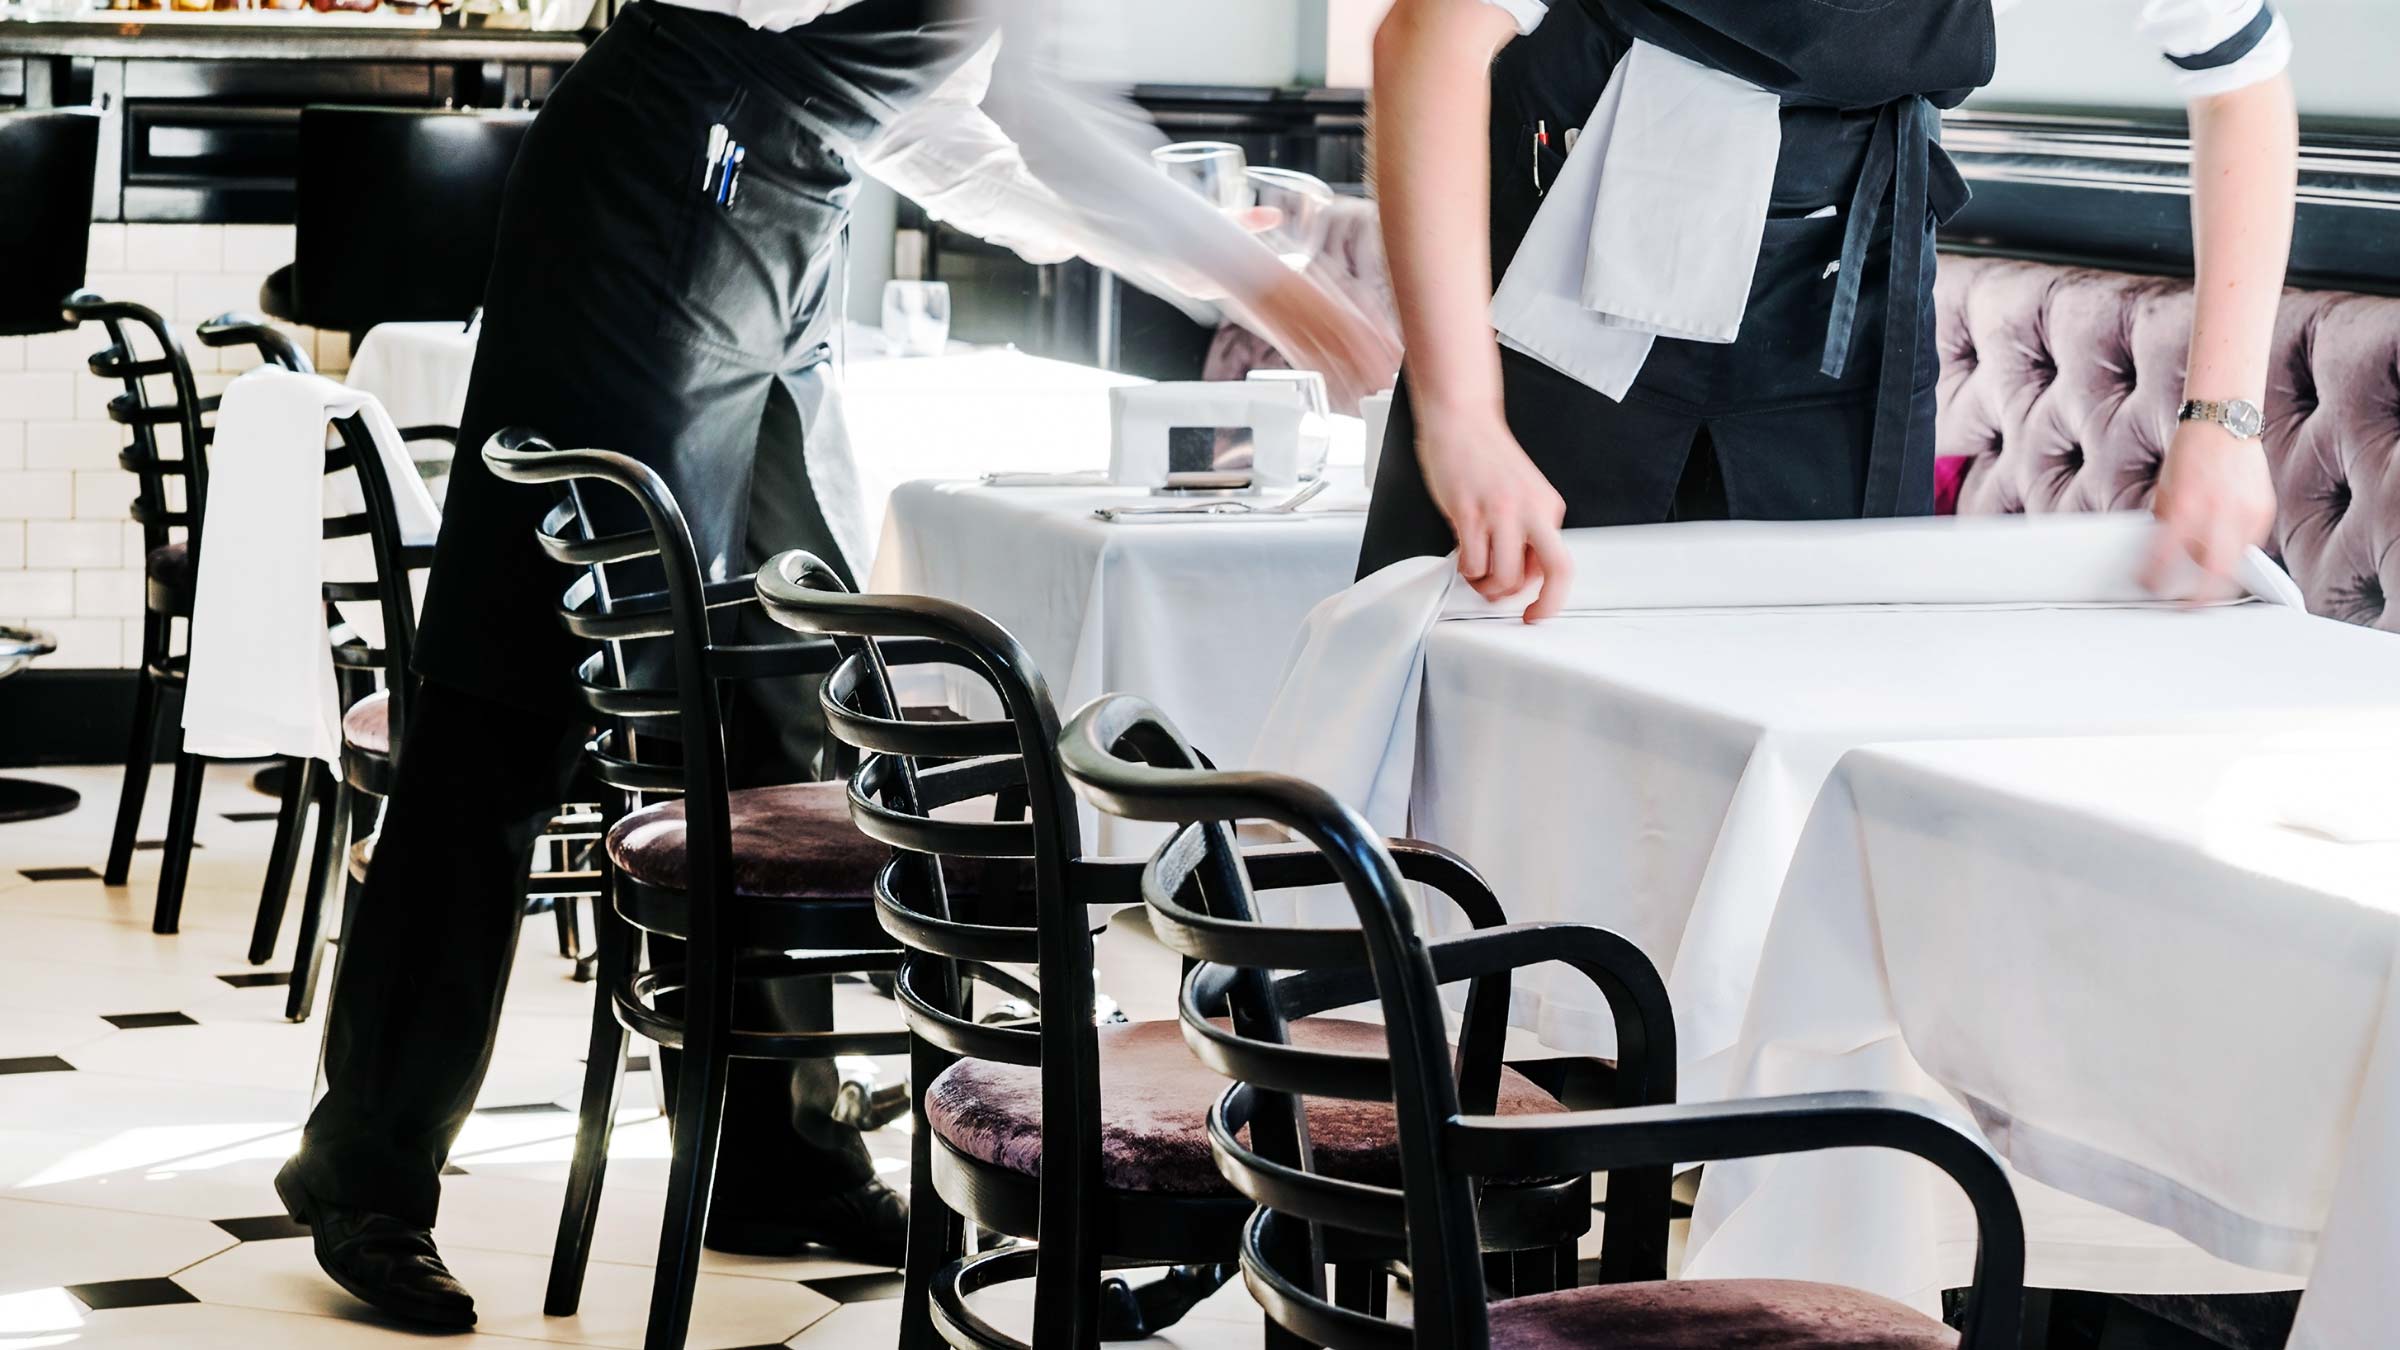 New labour: why hospitality’s workforce shortage could be a watershed moment